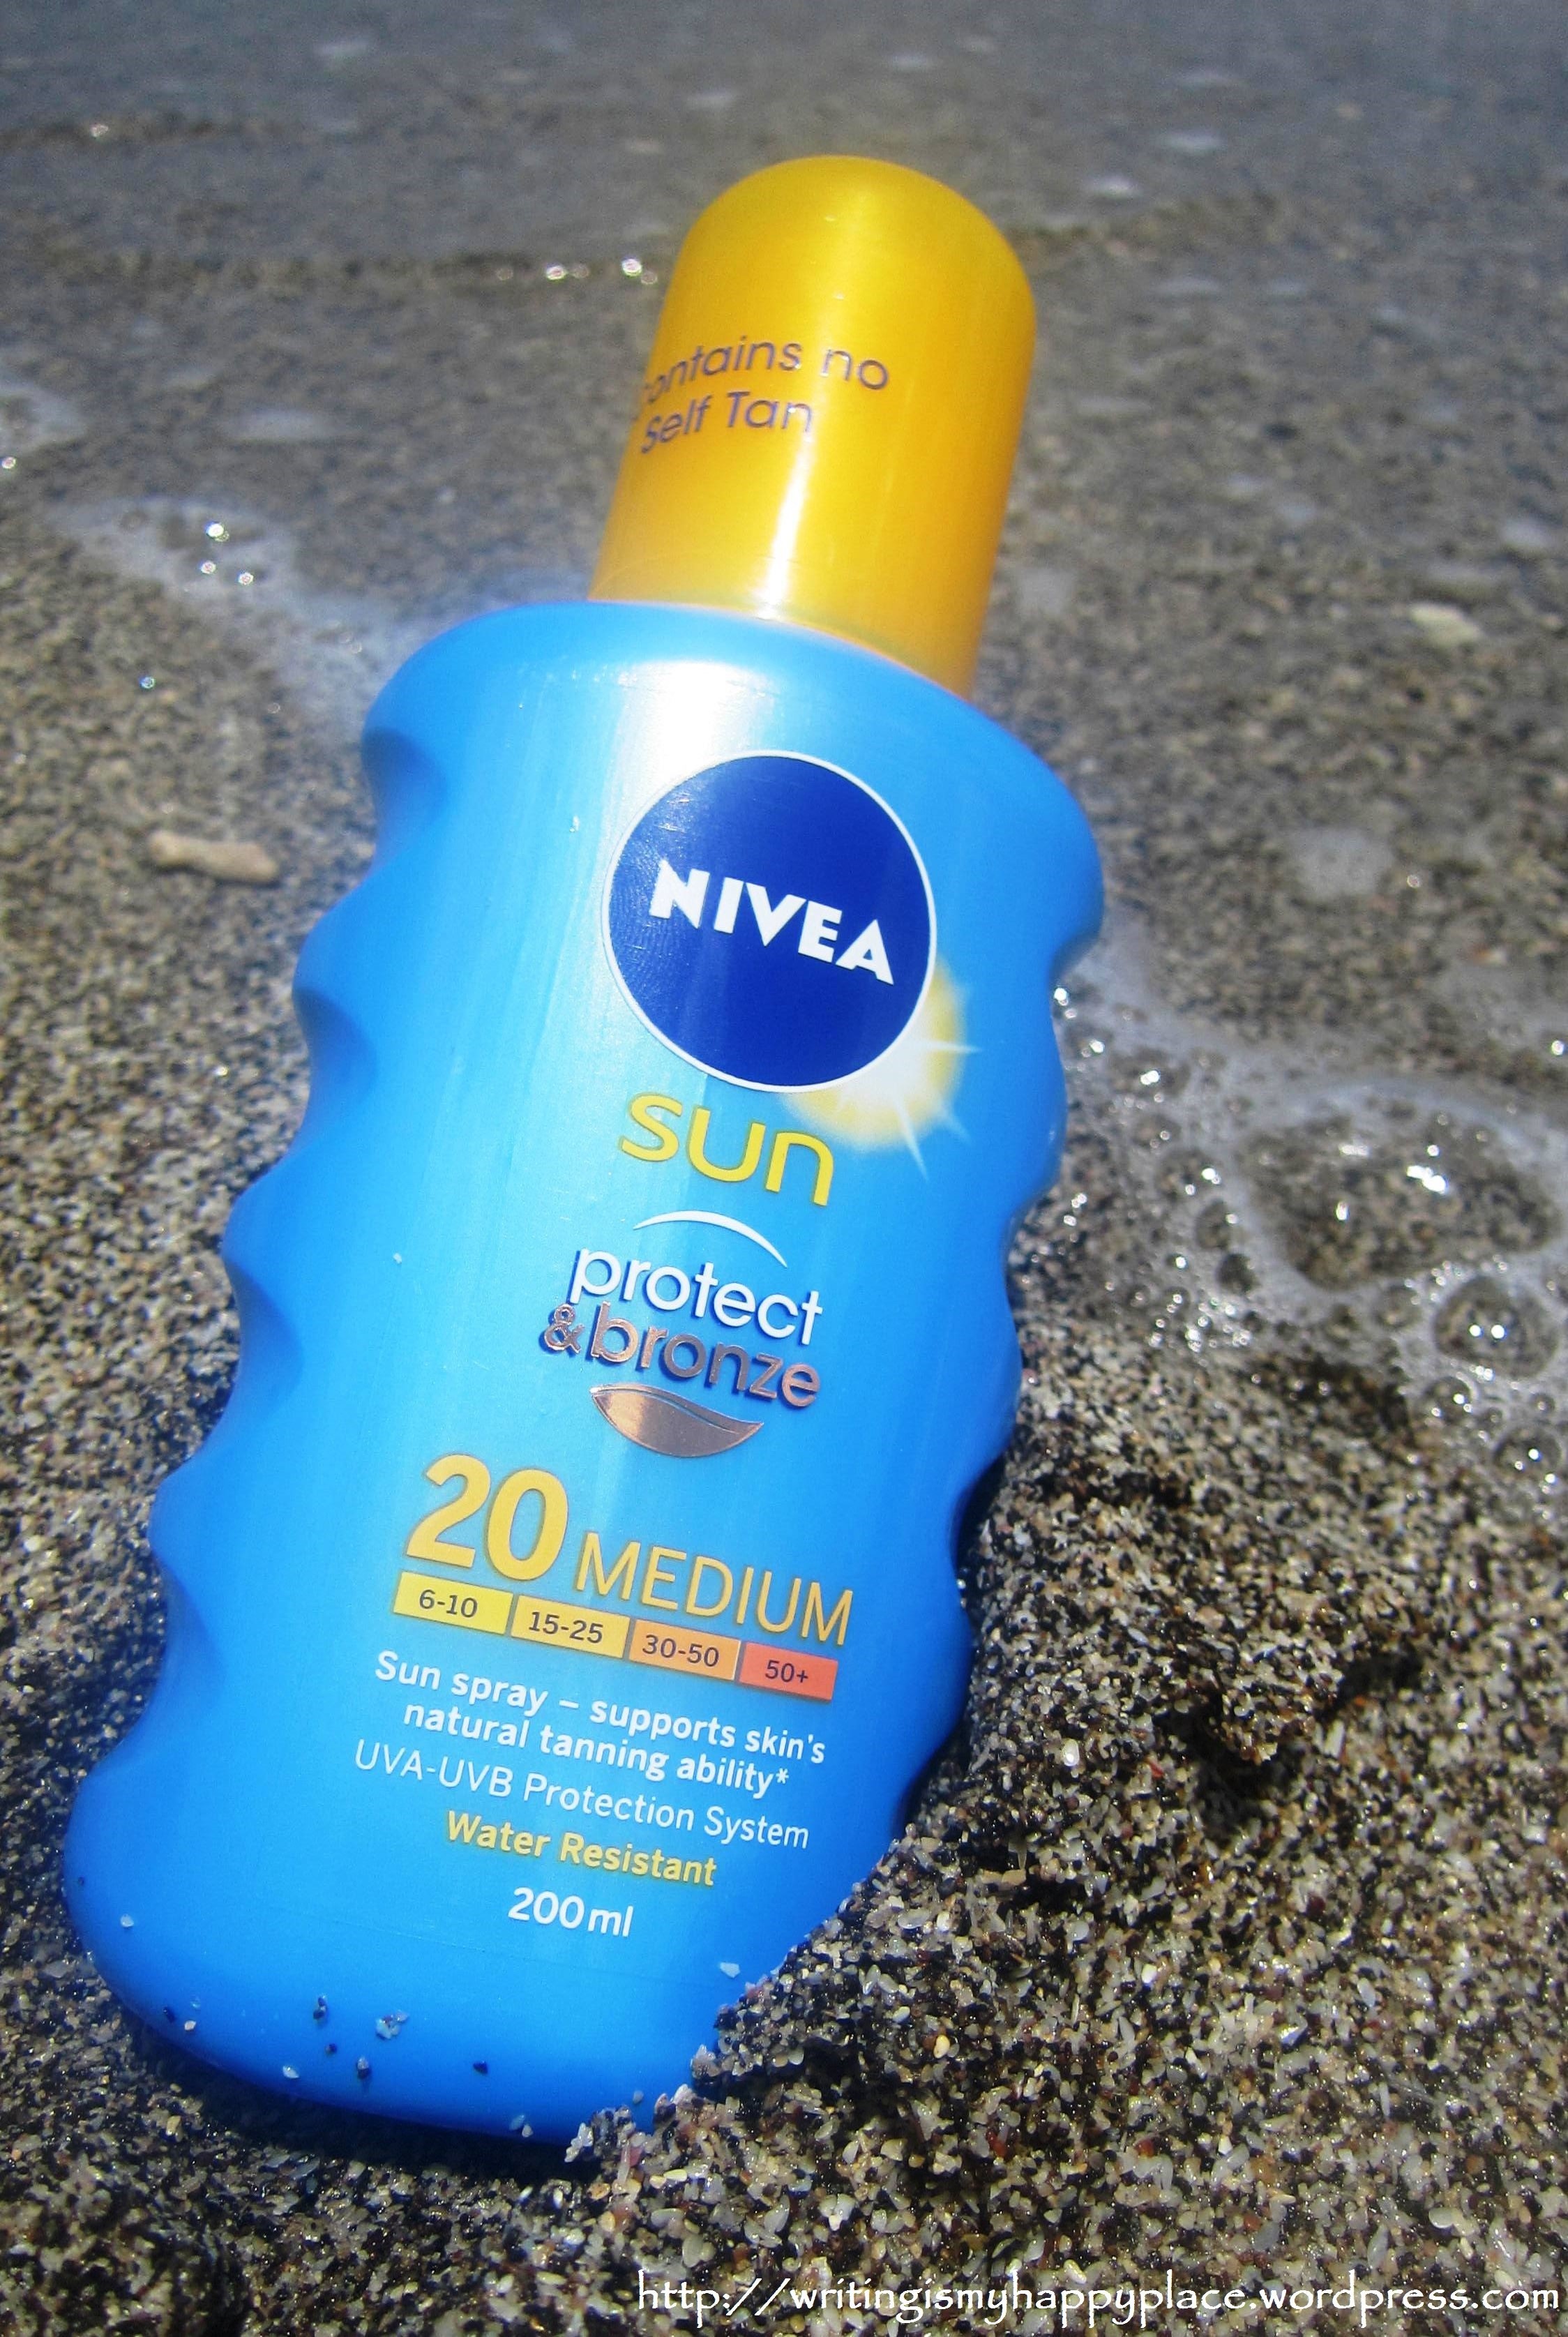 Sun Protect and Bronze Spray SPF 20 | Safe and Tanned Under the Sun | writingismyhappyplace